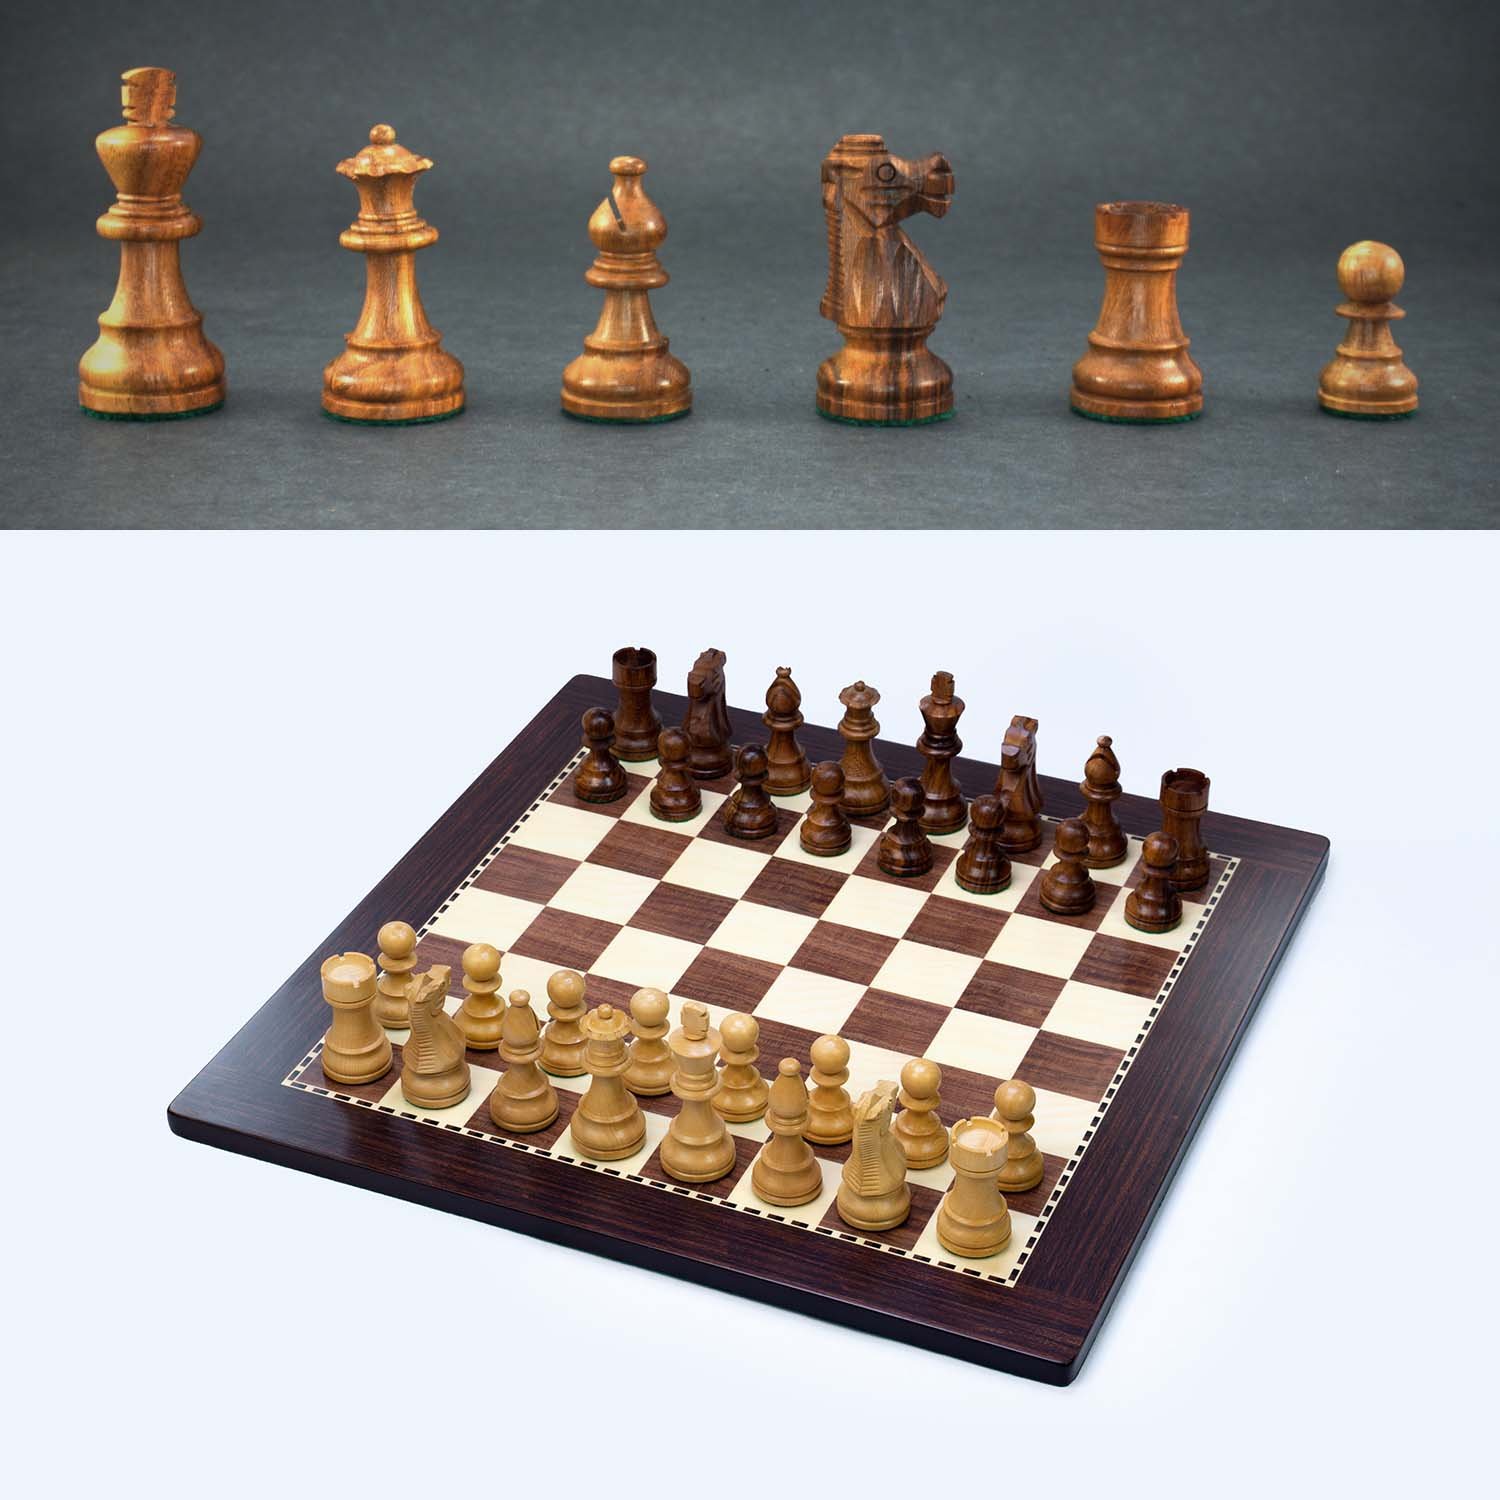 French Staunton Chess Set - Weighted Pieces & Walnut Wood Board 14.75 in.